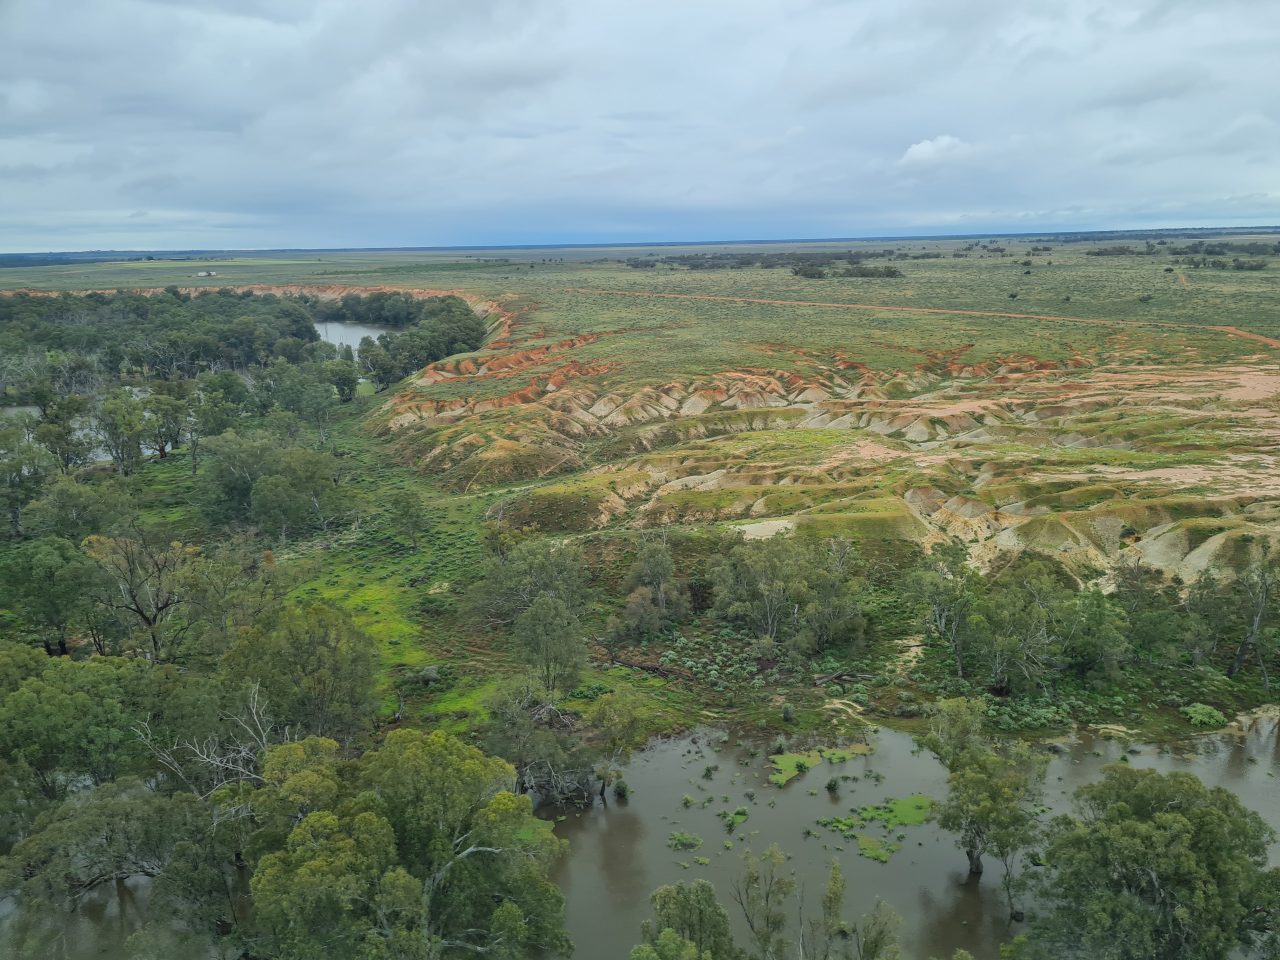 Aerial photo of flooded flowing river spreading beyond the tree lined banks. The surrounding floodplain is green and vegetation is covering the eroded orange soil  formaitons along the edge of the floodplain by the river. The sky is cloudy and grey.